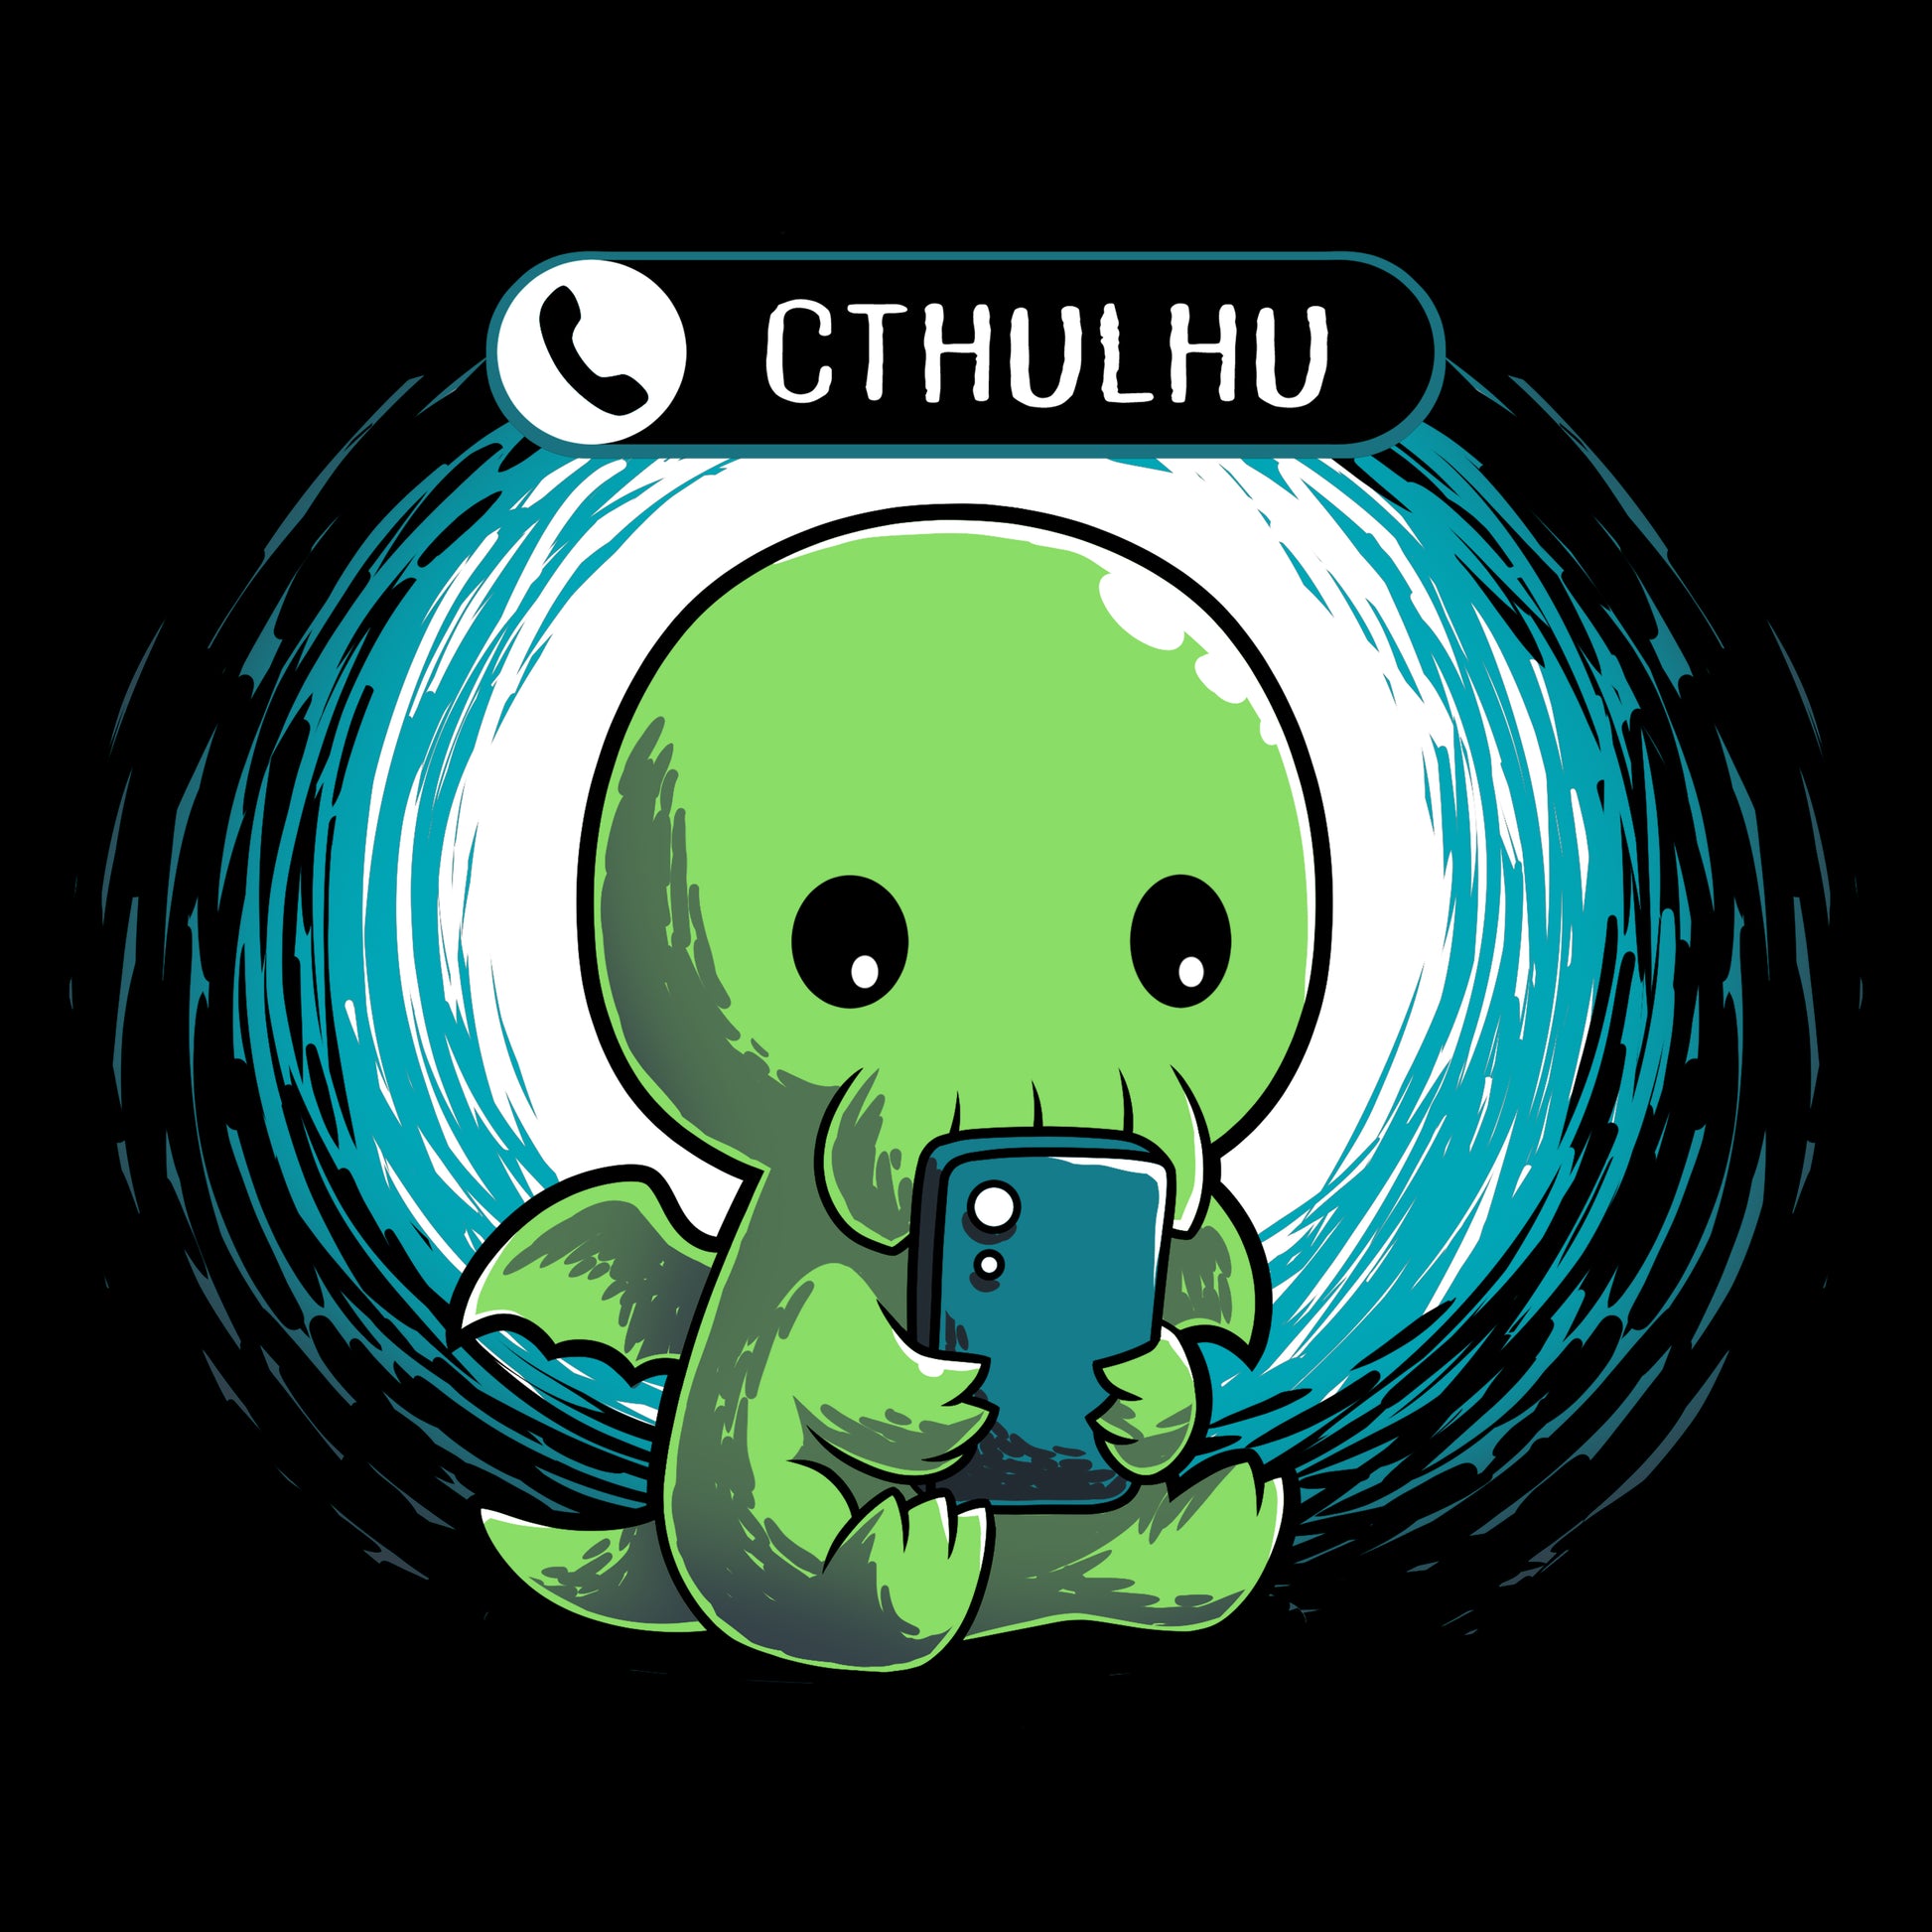 A black t-shirt featuring a cartoon Cthulhu holding a cell phone called "Cthulhu Calling" by TeeTurtle.